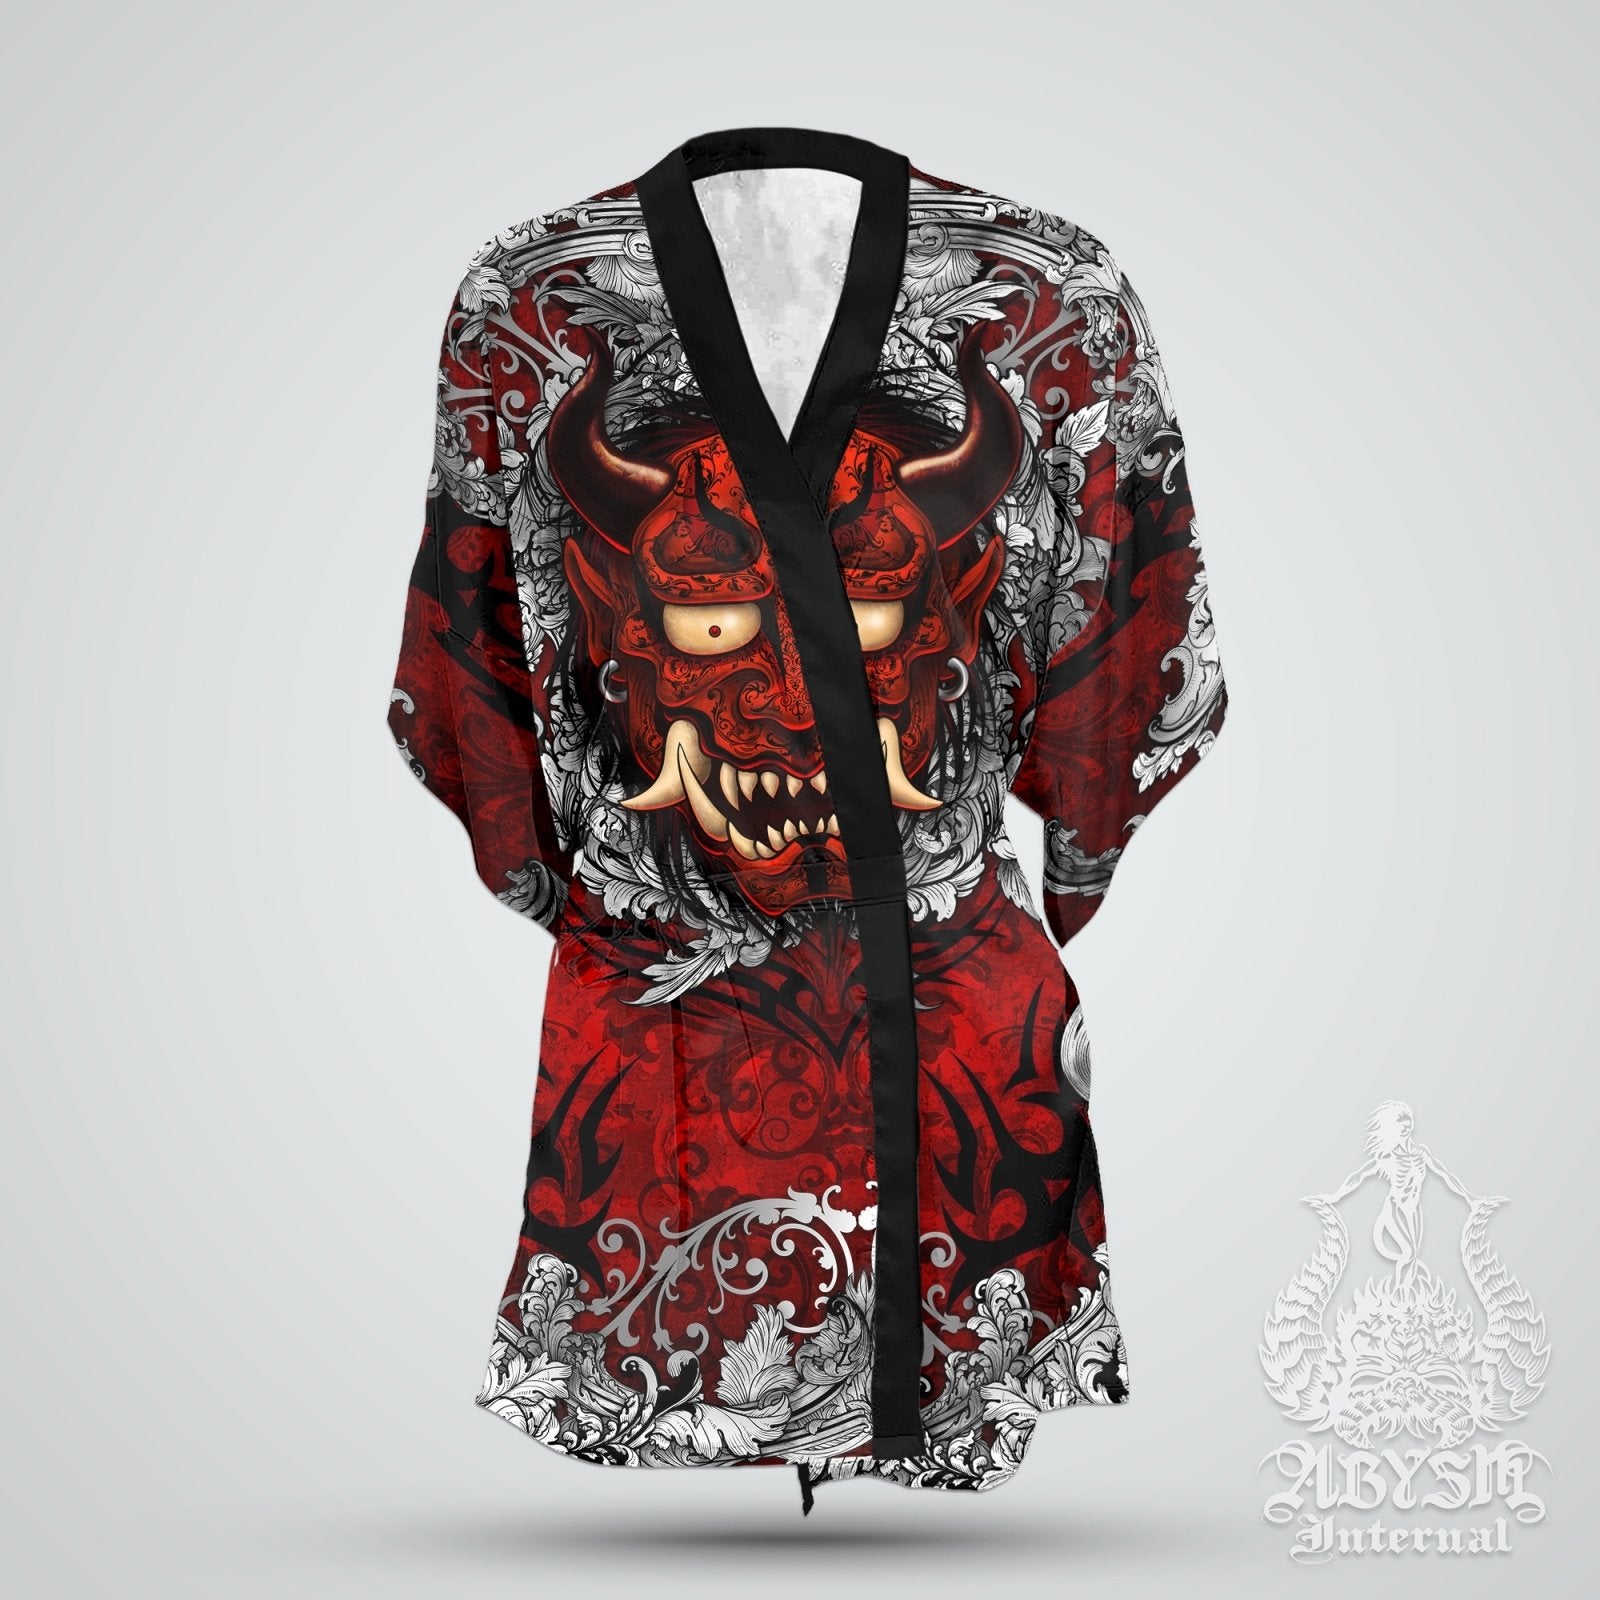 Demon Cover Up, Beach Outfit, Oni Party Kimono, Japanese Summer Festival Robe, Indie and Alternative Clothing, Unisex - Silver Red - Abysm Internal